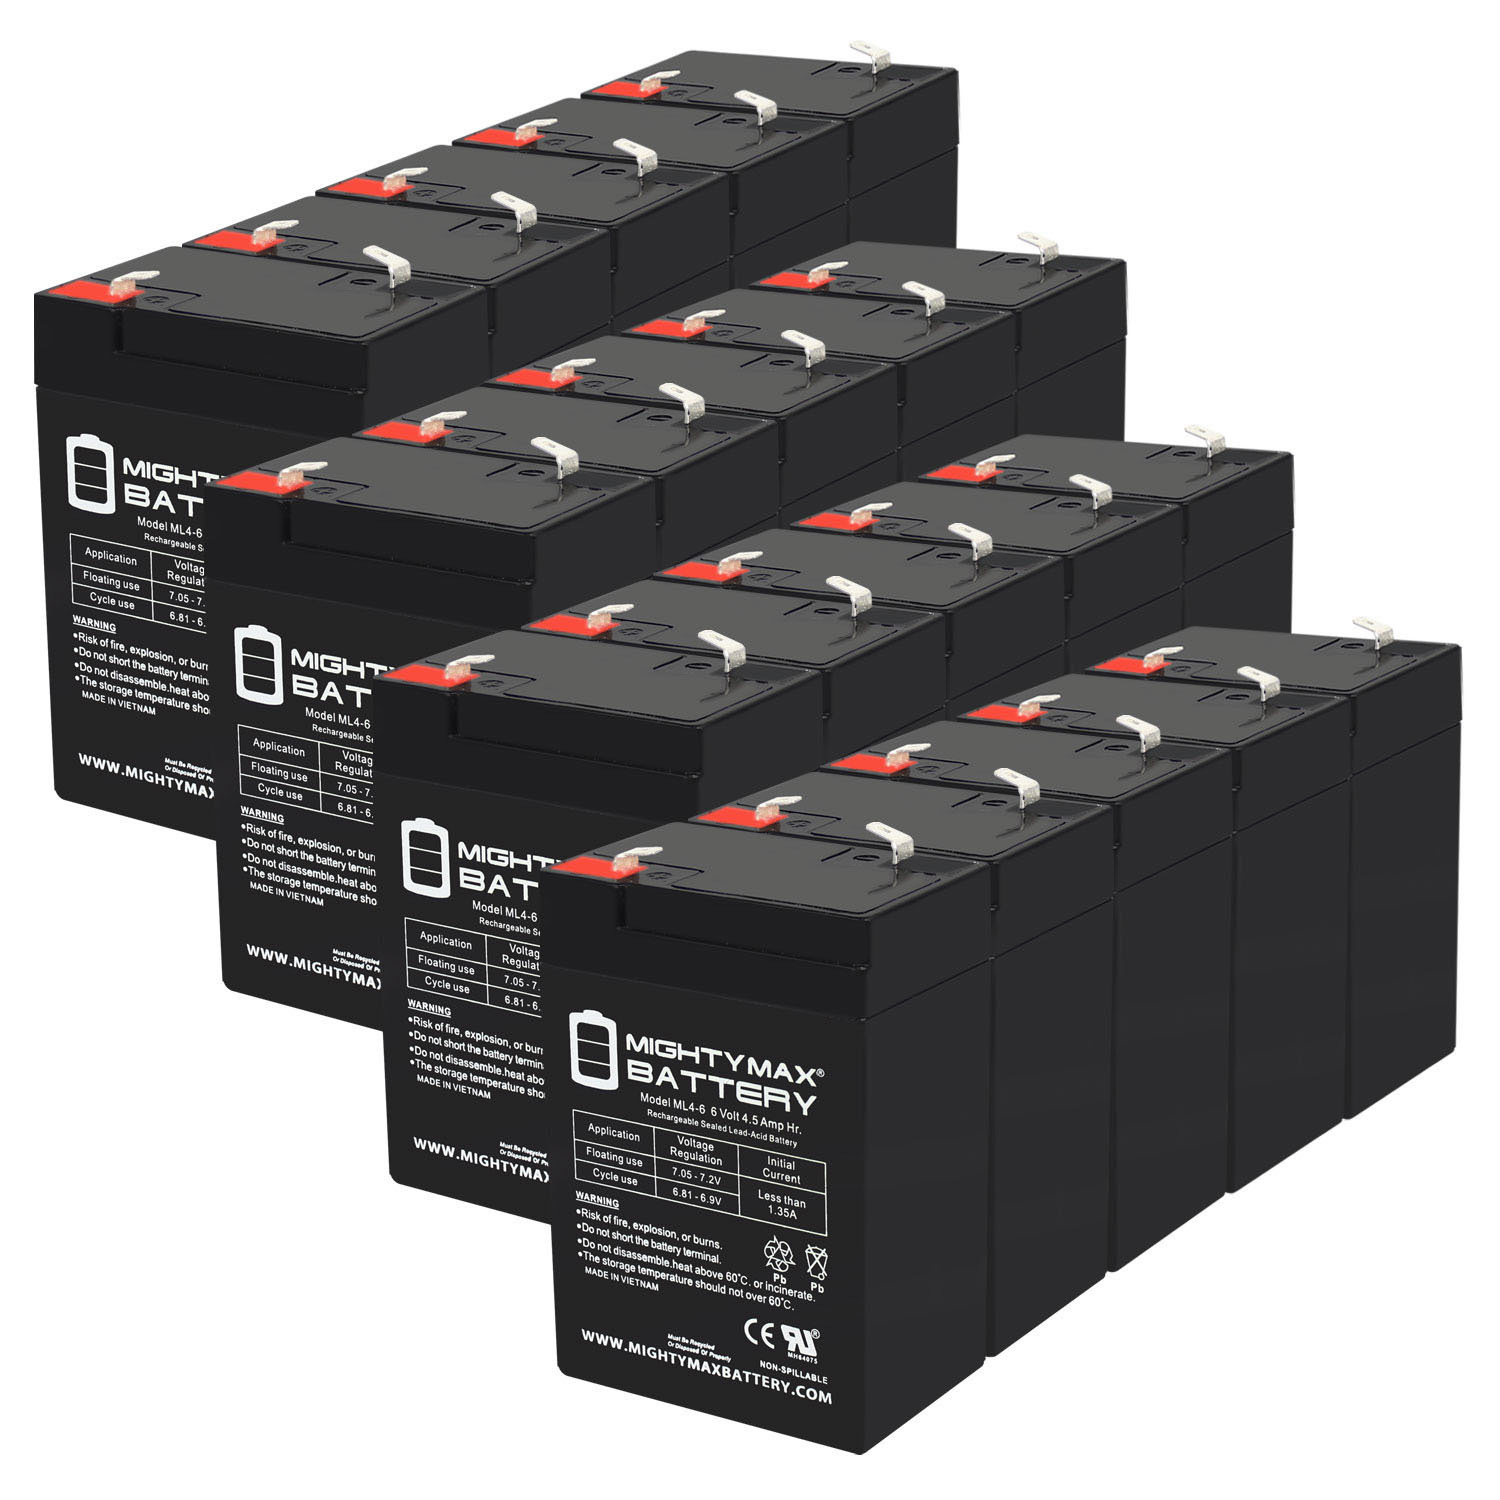 6V 4.5AH SLA Replacement Battery for Dual-Lite ICL-1 - 20 Pack